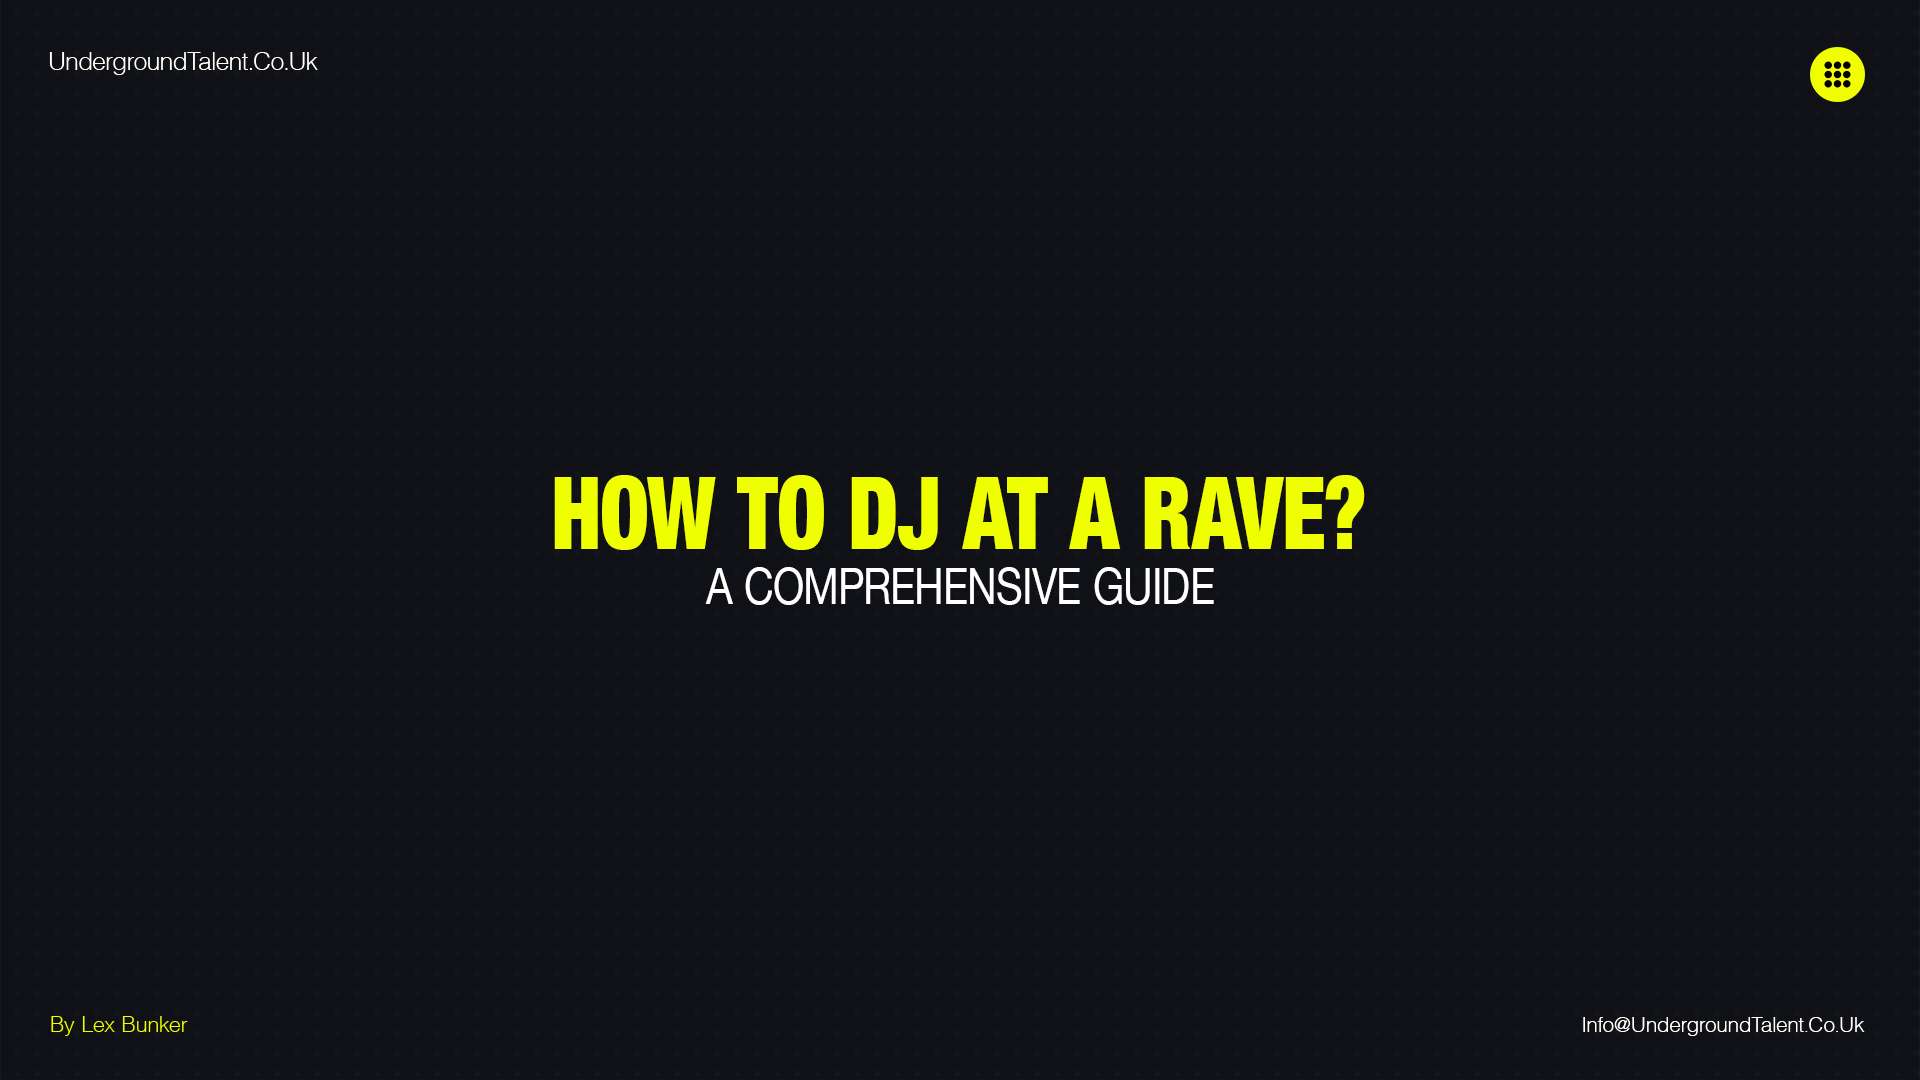 How to DJ at a Rave? A Comprehensive Guide